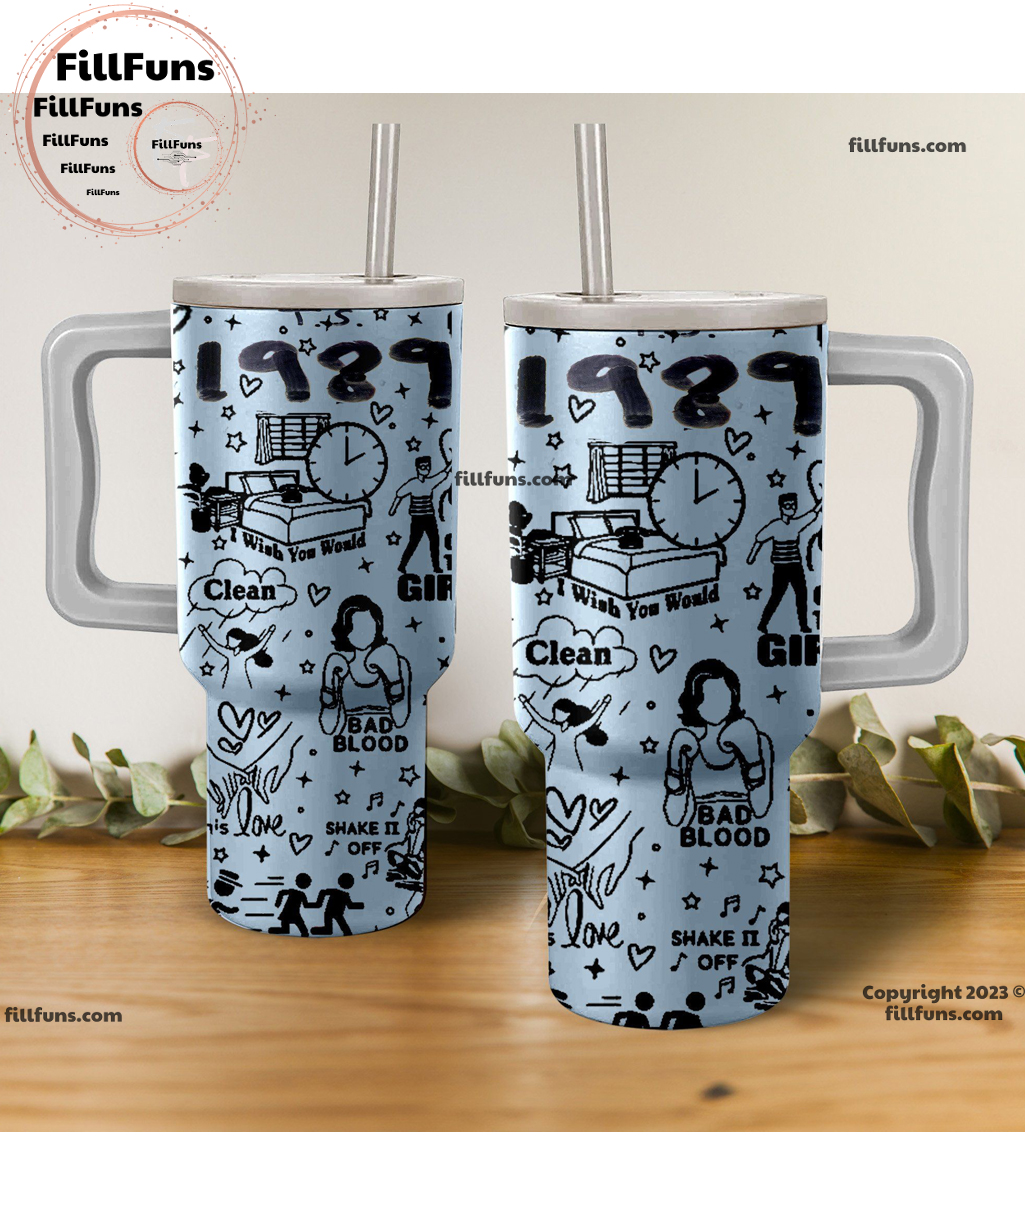 https://fillfuns.com/wp-content/uploads/2024/01/taylor-swift-1989-40oz-tumbler-with-handle-and-straw-1-FGI3n.jpg